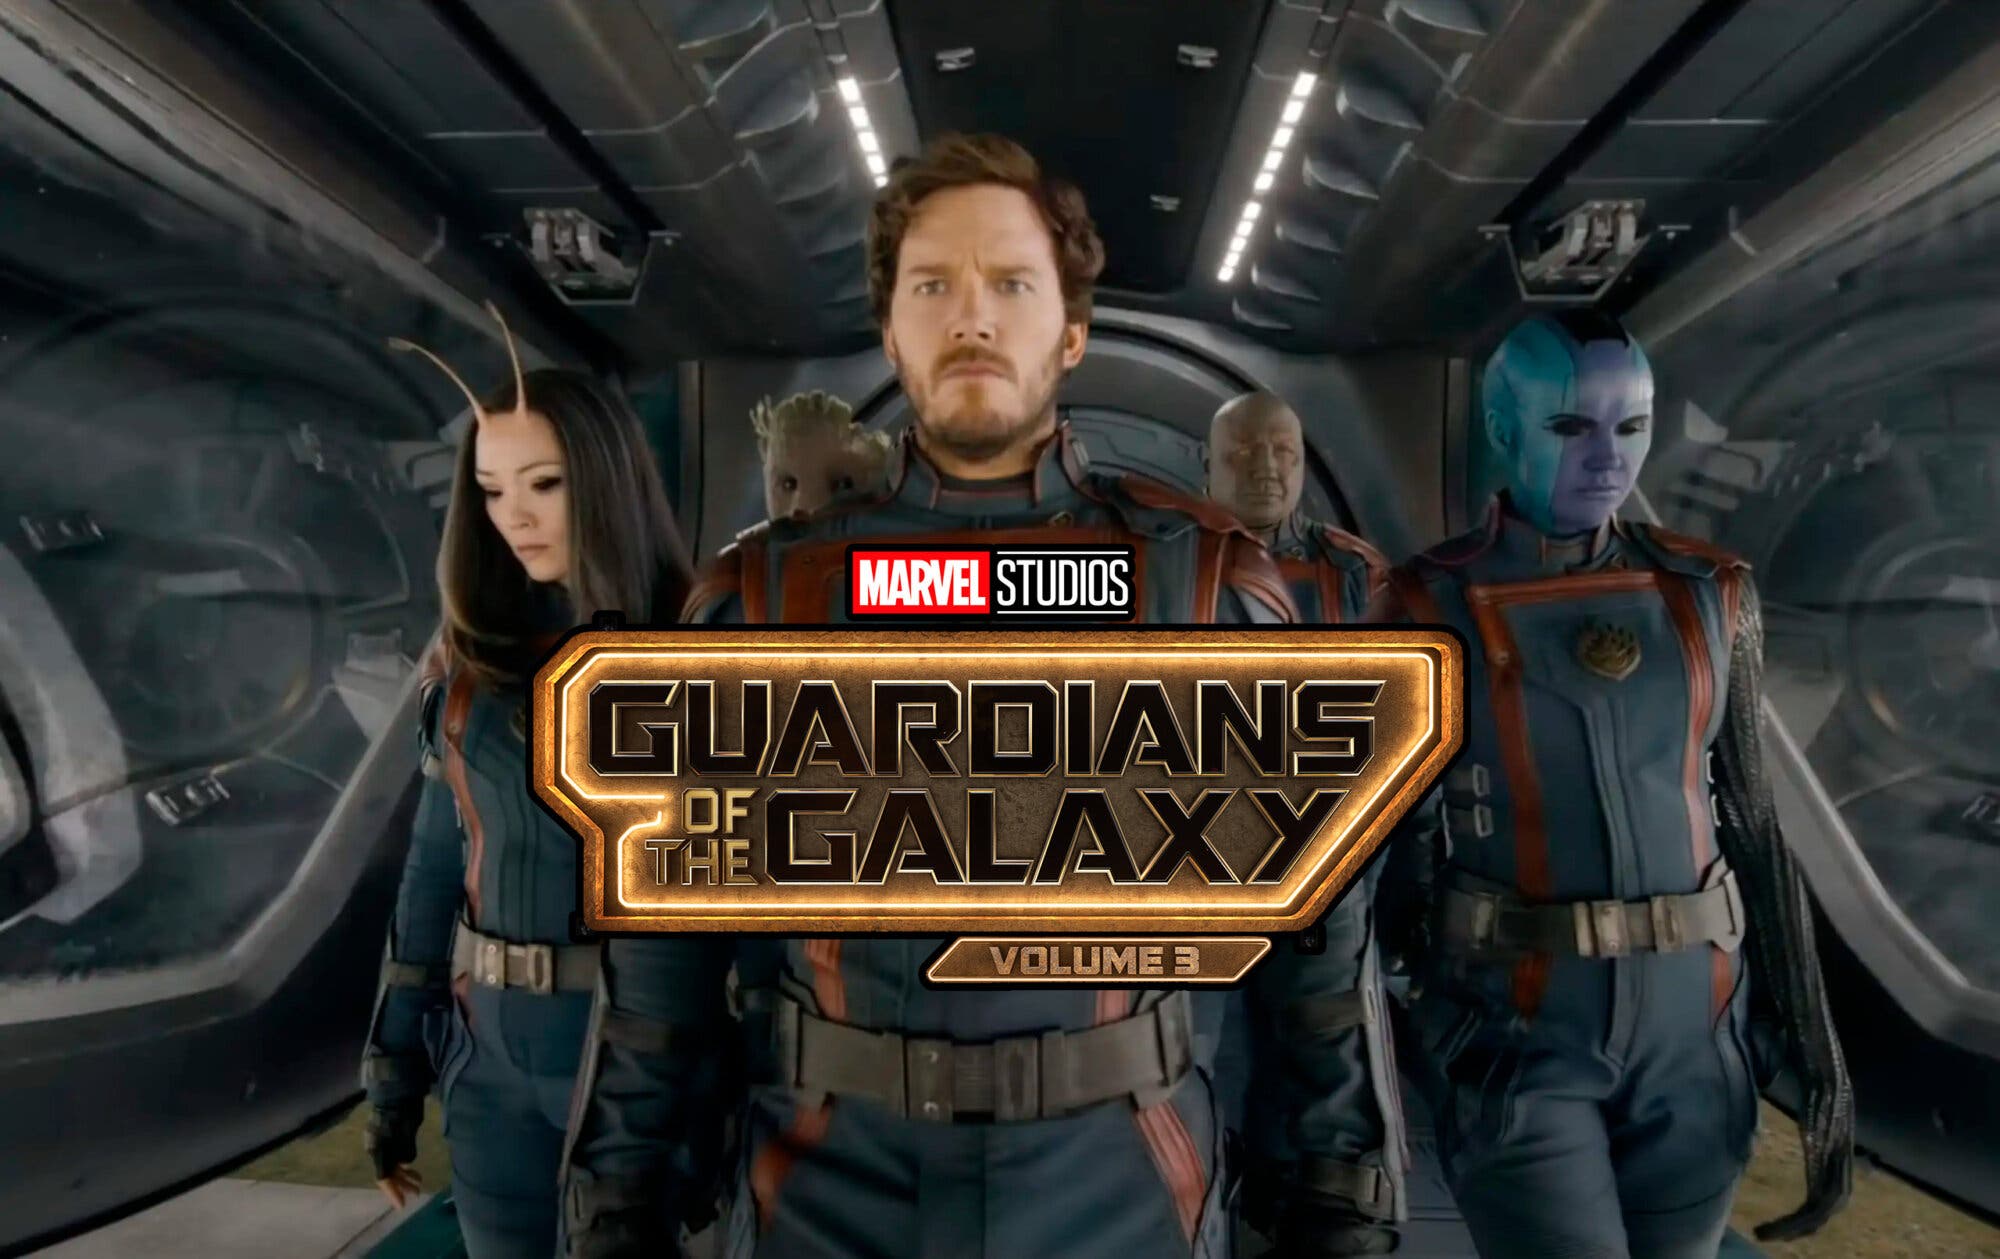 The Ending We All Want: Here’s the Latest Guardians of the Galaxy Vol.3 Trailer